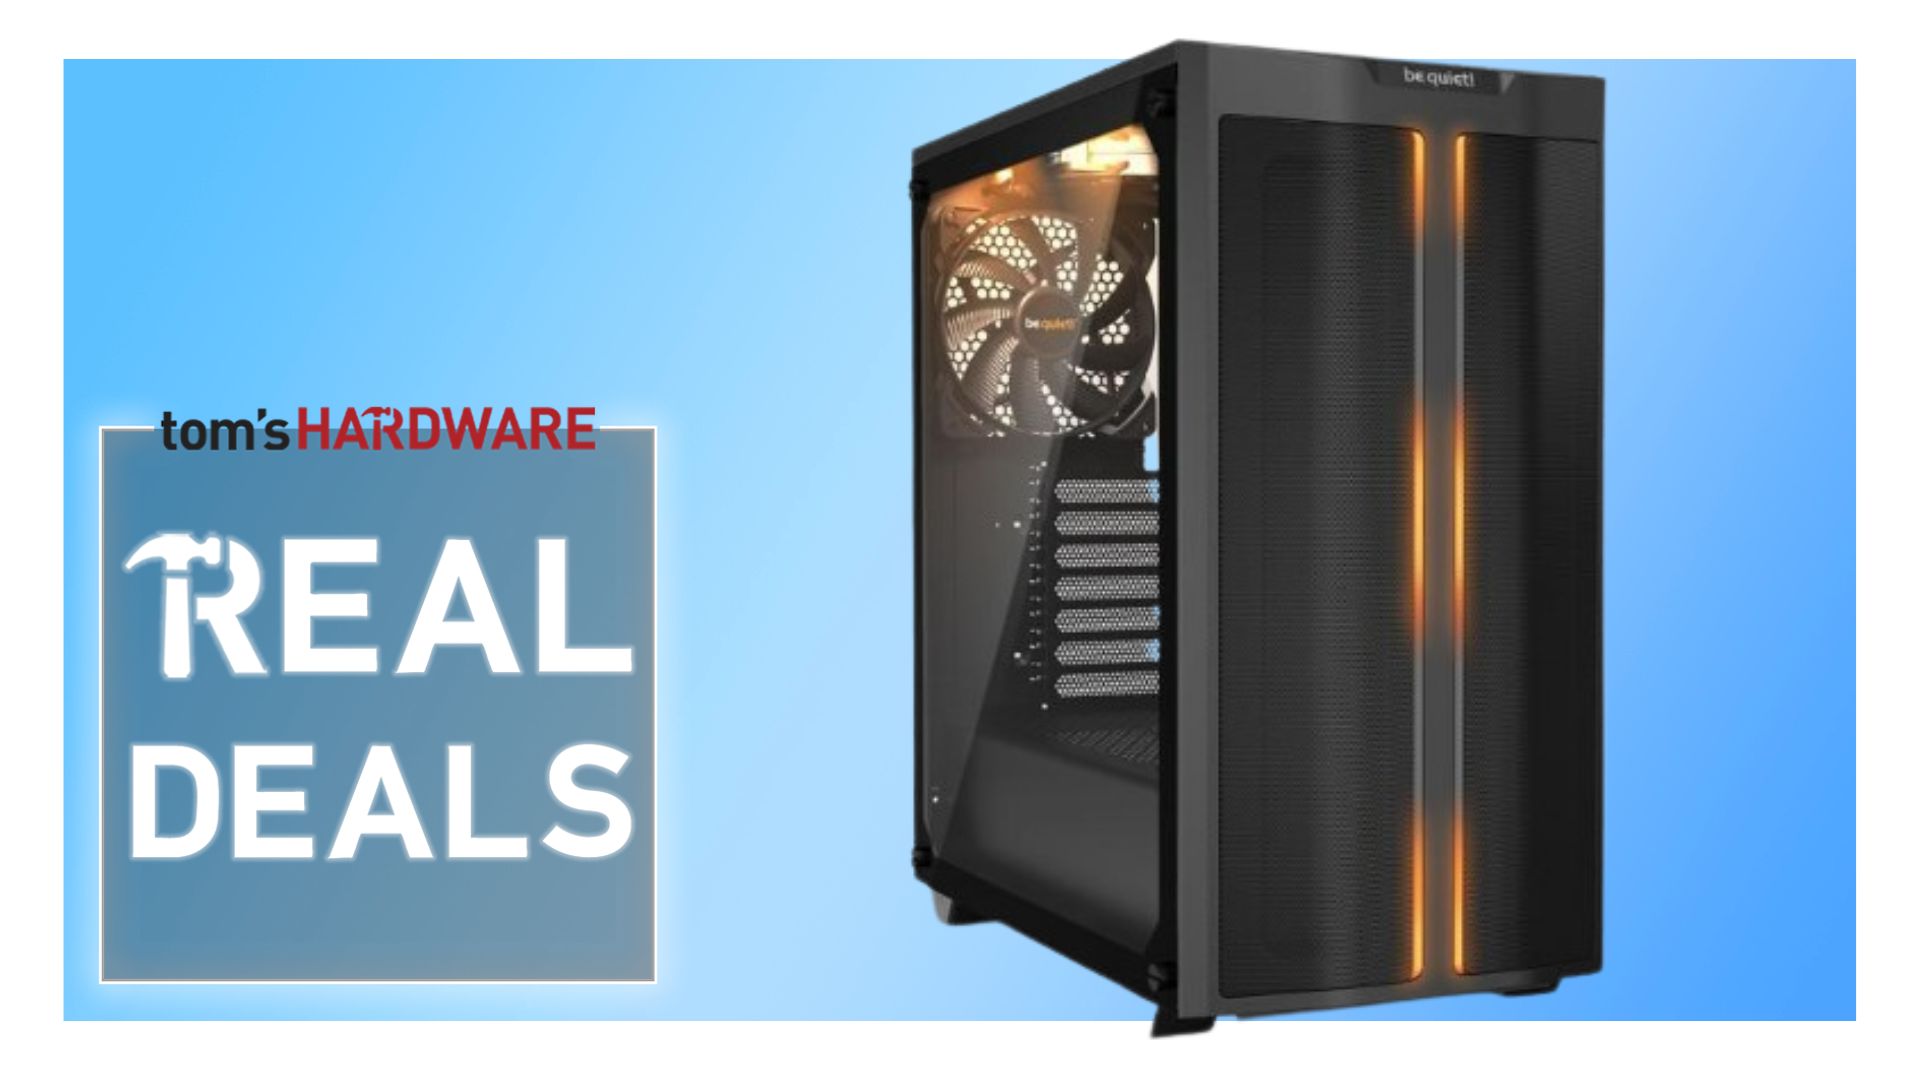 Lots of PC parts are discounted today